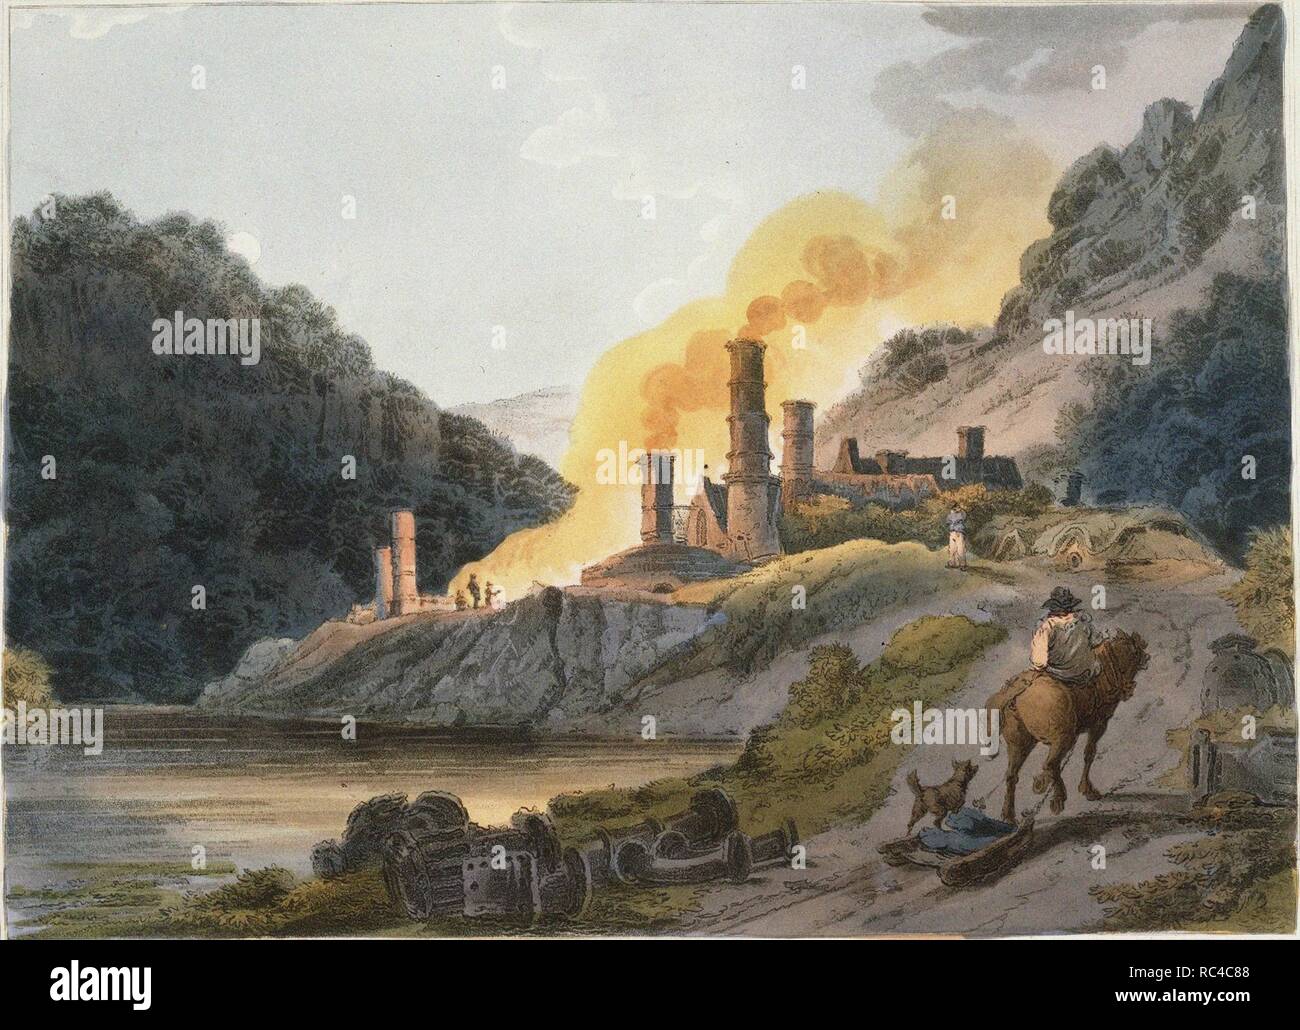 Iron Works, Colebrook Dale. Museum: private Sammlung. Autor: Philip Loutherbourg, Jakobus der Jüngere. Stockfoto